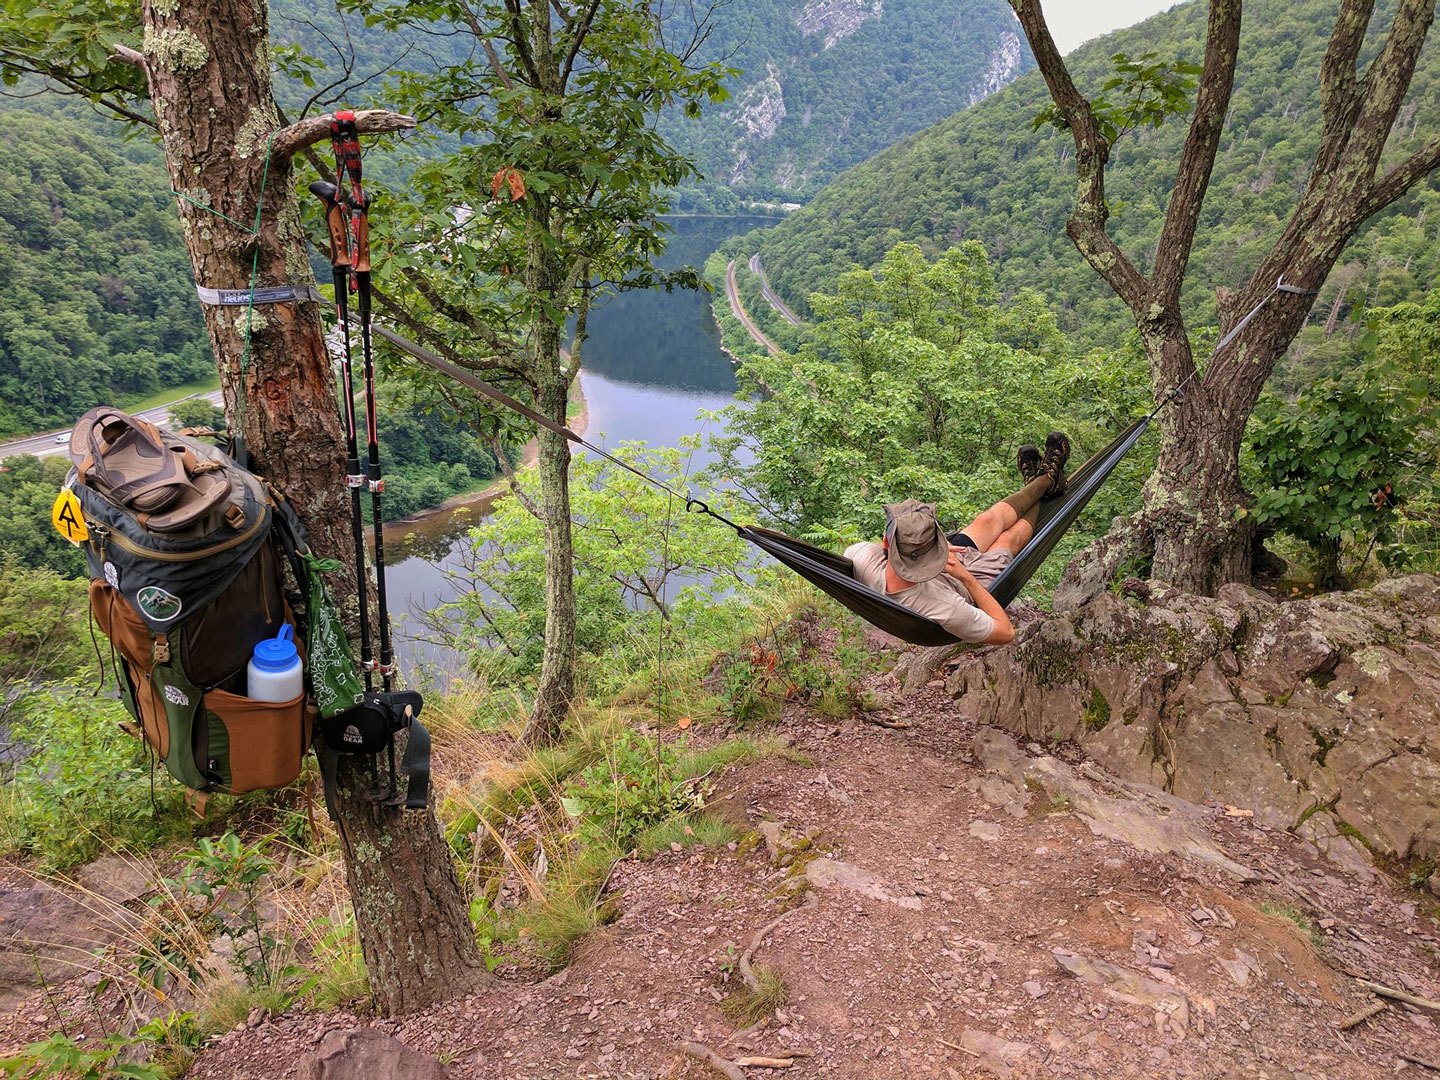 A U.S. military veteran takes a break to absorb the views in Delaware Water Gap National Recreation Area. Photo courtesy of Warrior Expeditions